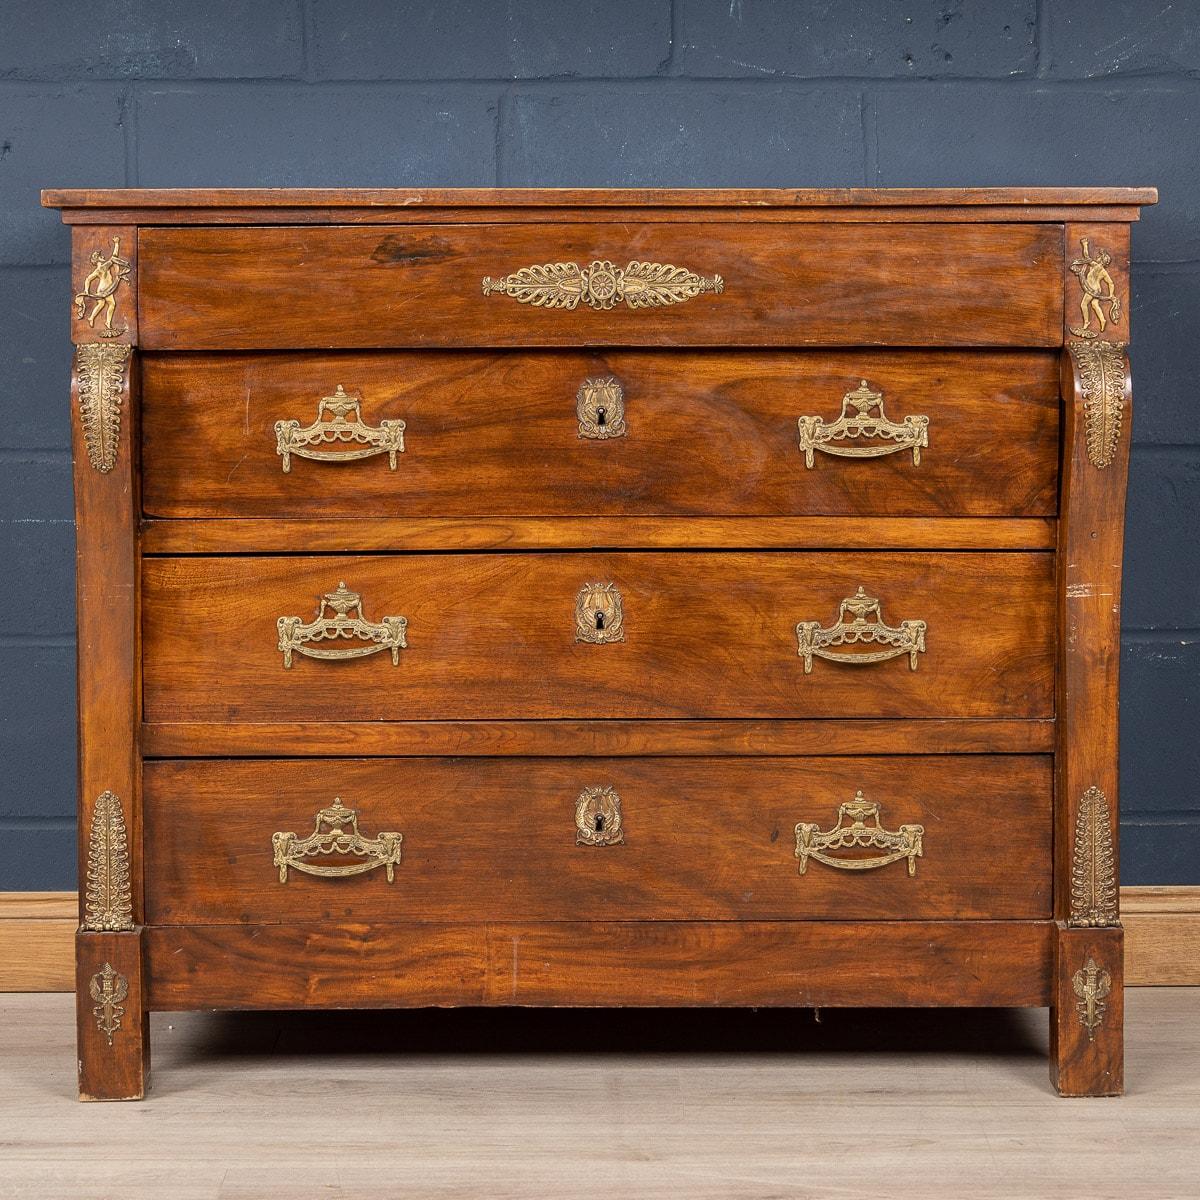 A beautiful Empire dresser from the early 19th century, with three main drawers and a fourth drawer just below the tray in veneered walnut feathers. Note how the flame is drawn on the front and sides with a beautiful play of light and dark with the